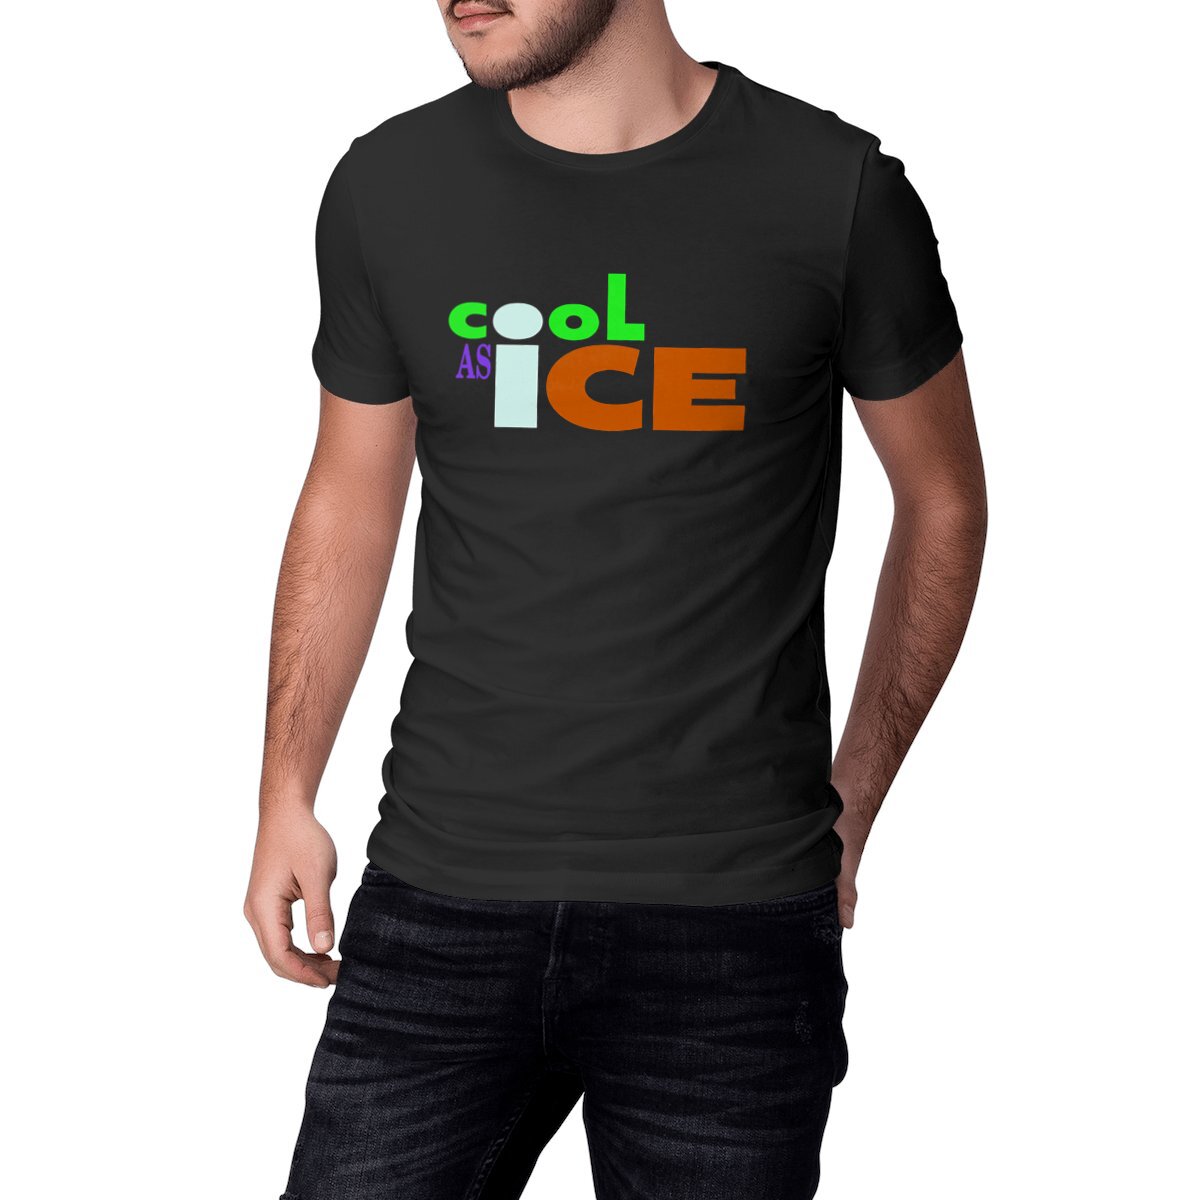 Cool as ICE - T-Shirt  - Unisex